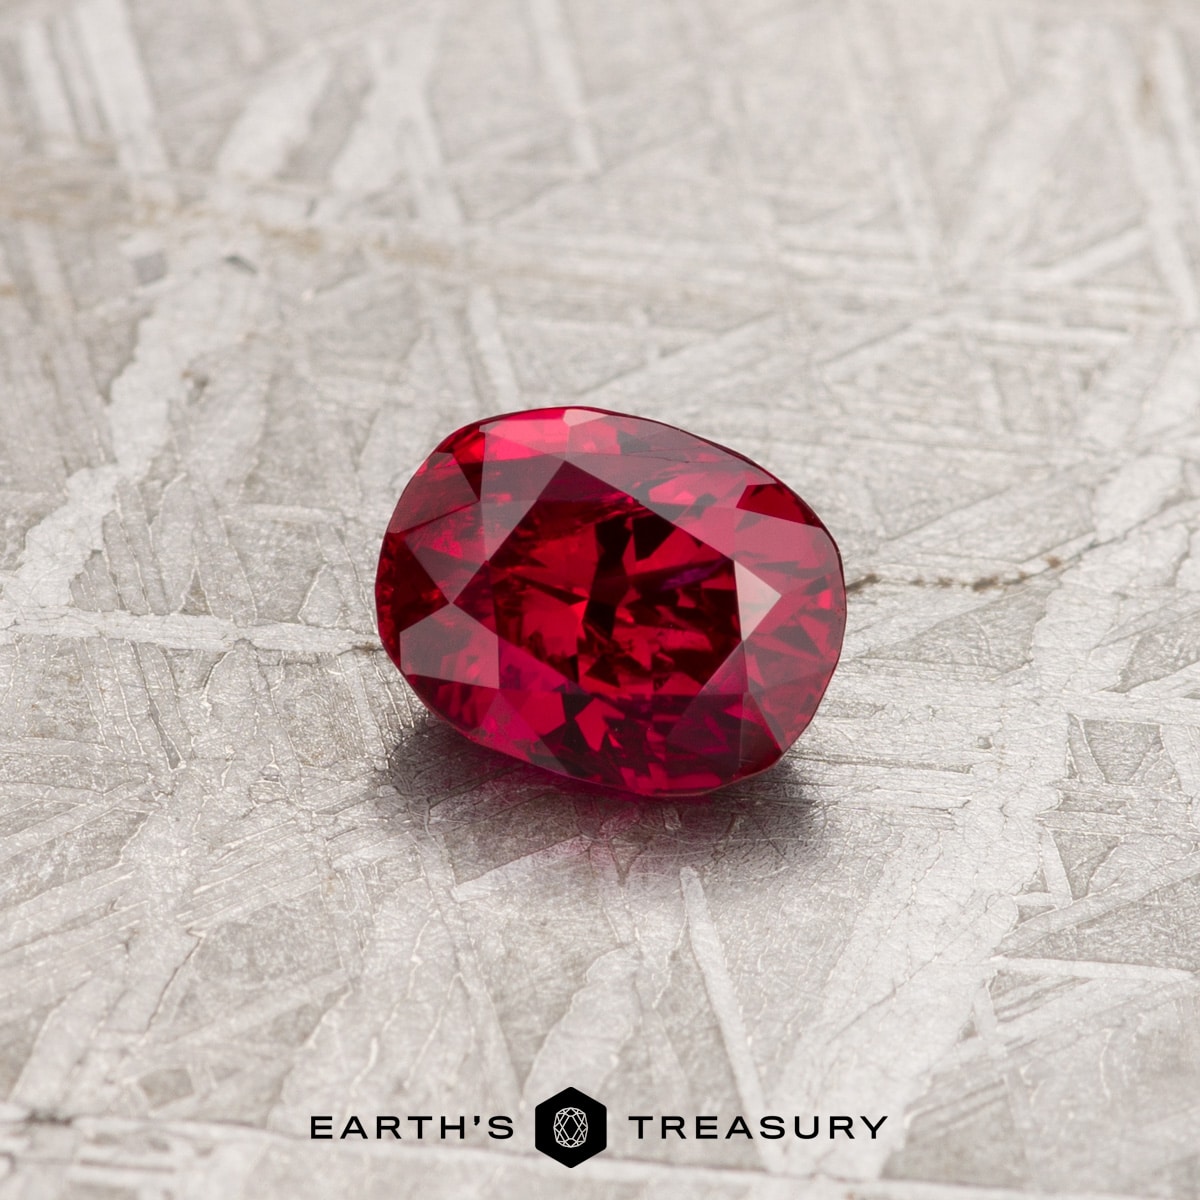 Ruby and Diamond Ring - GIA Certified - Untreated